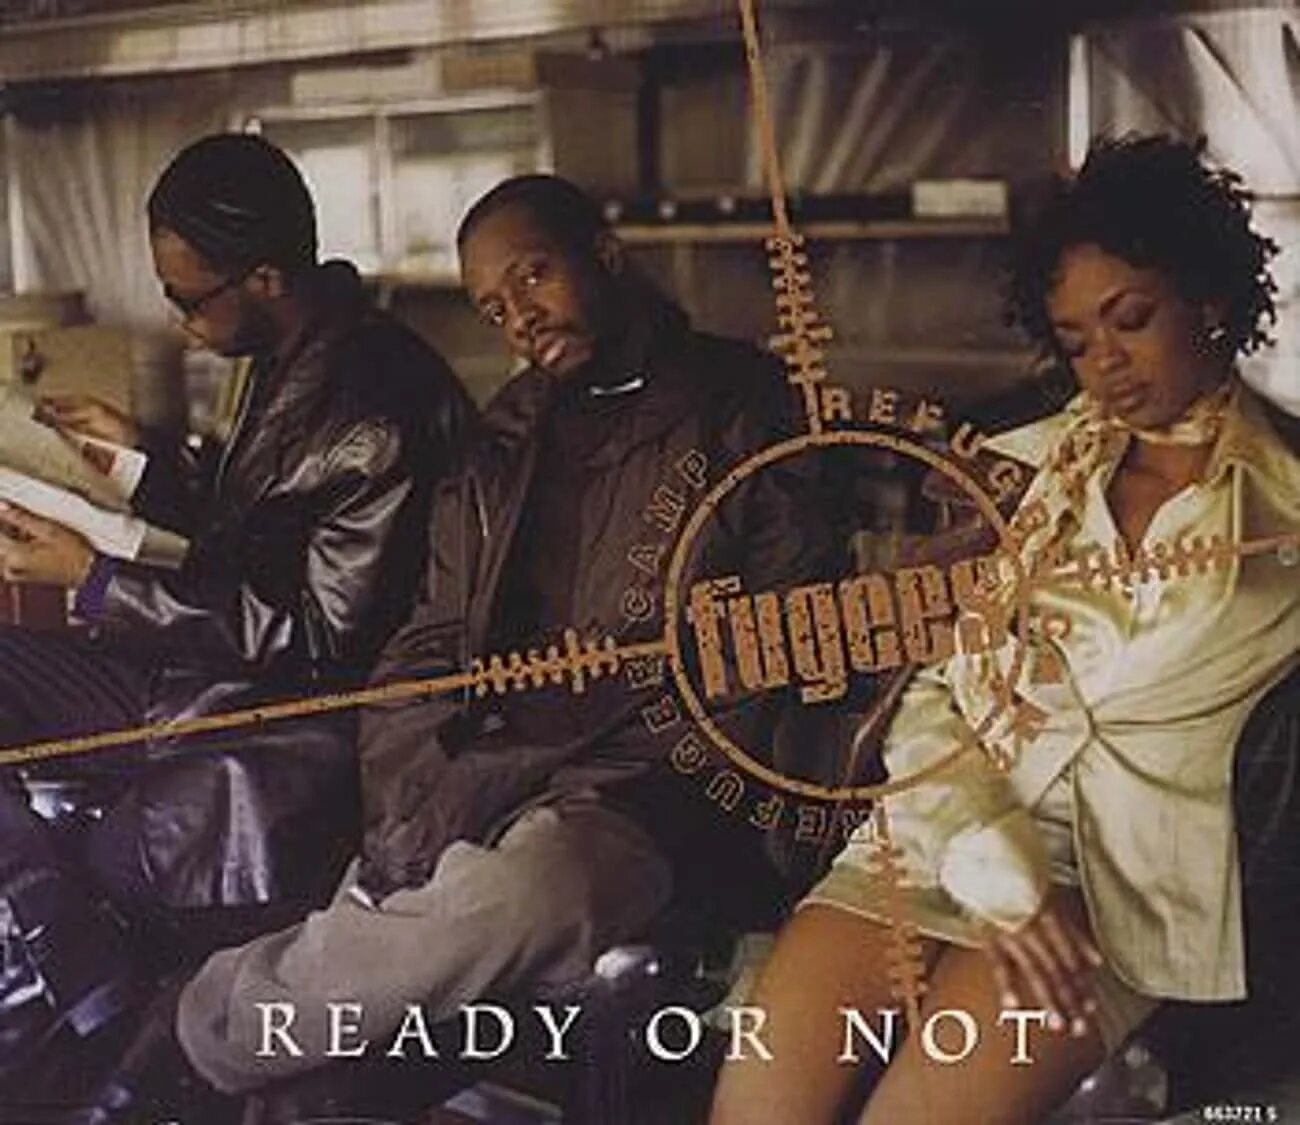 Ready or not песня. Fugees. The Fugees ready or. Fugees ready or not. Fugees the score 1996.